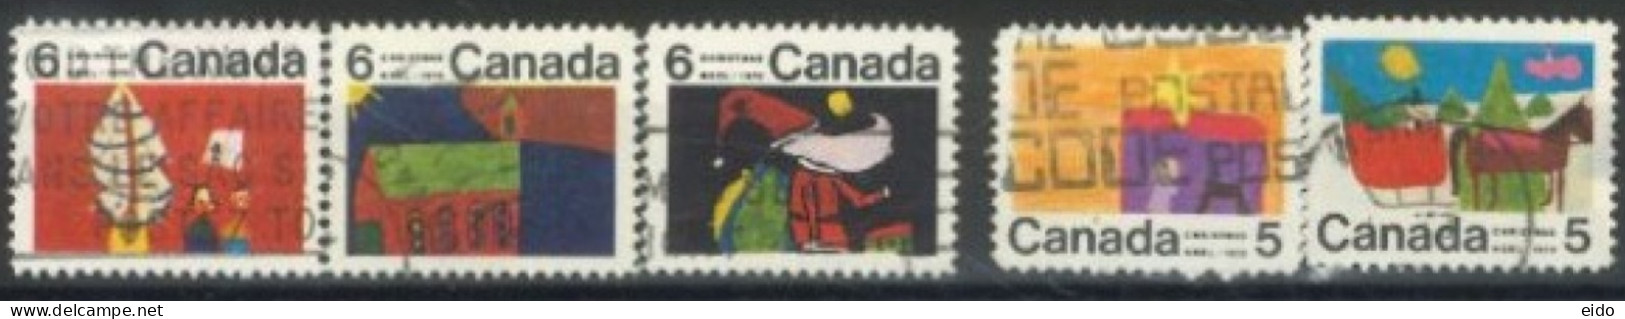 CANADA - 1970, CHRISTMAS STAMPS SET OF 5, USED. - Usati